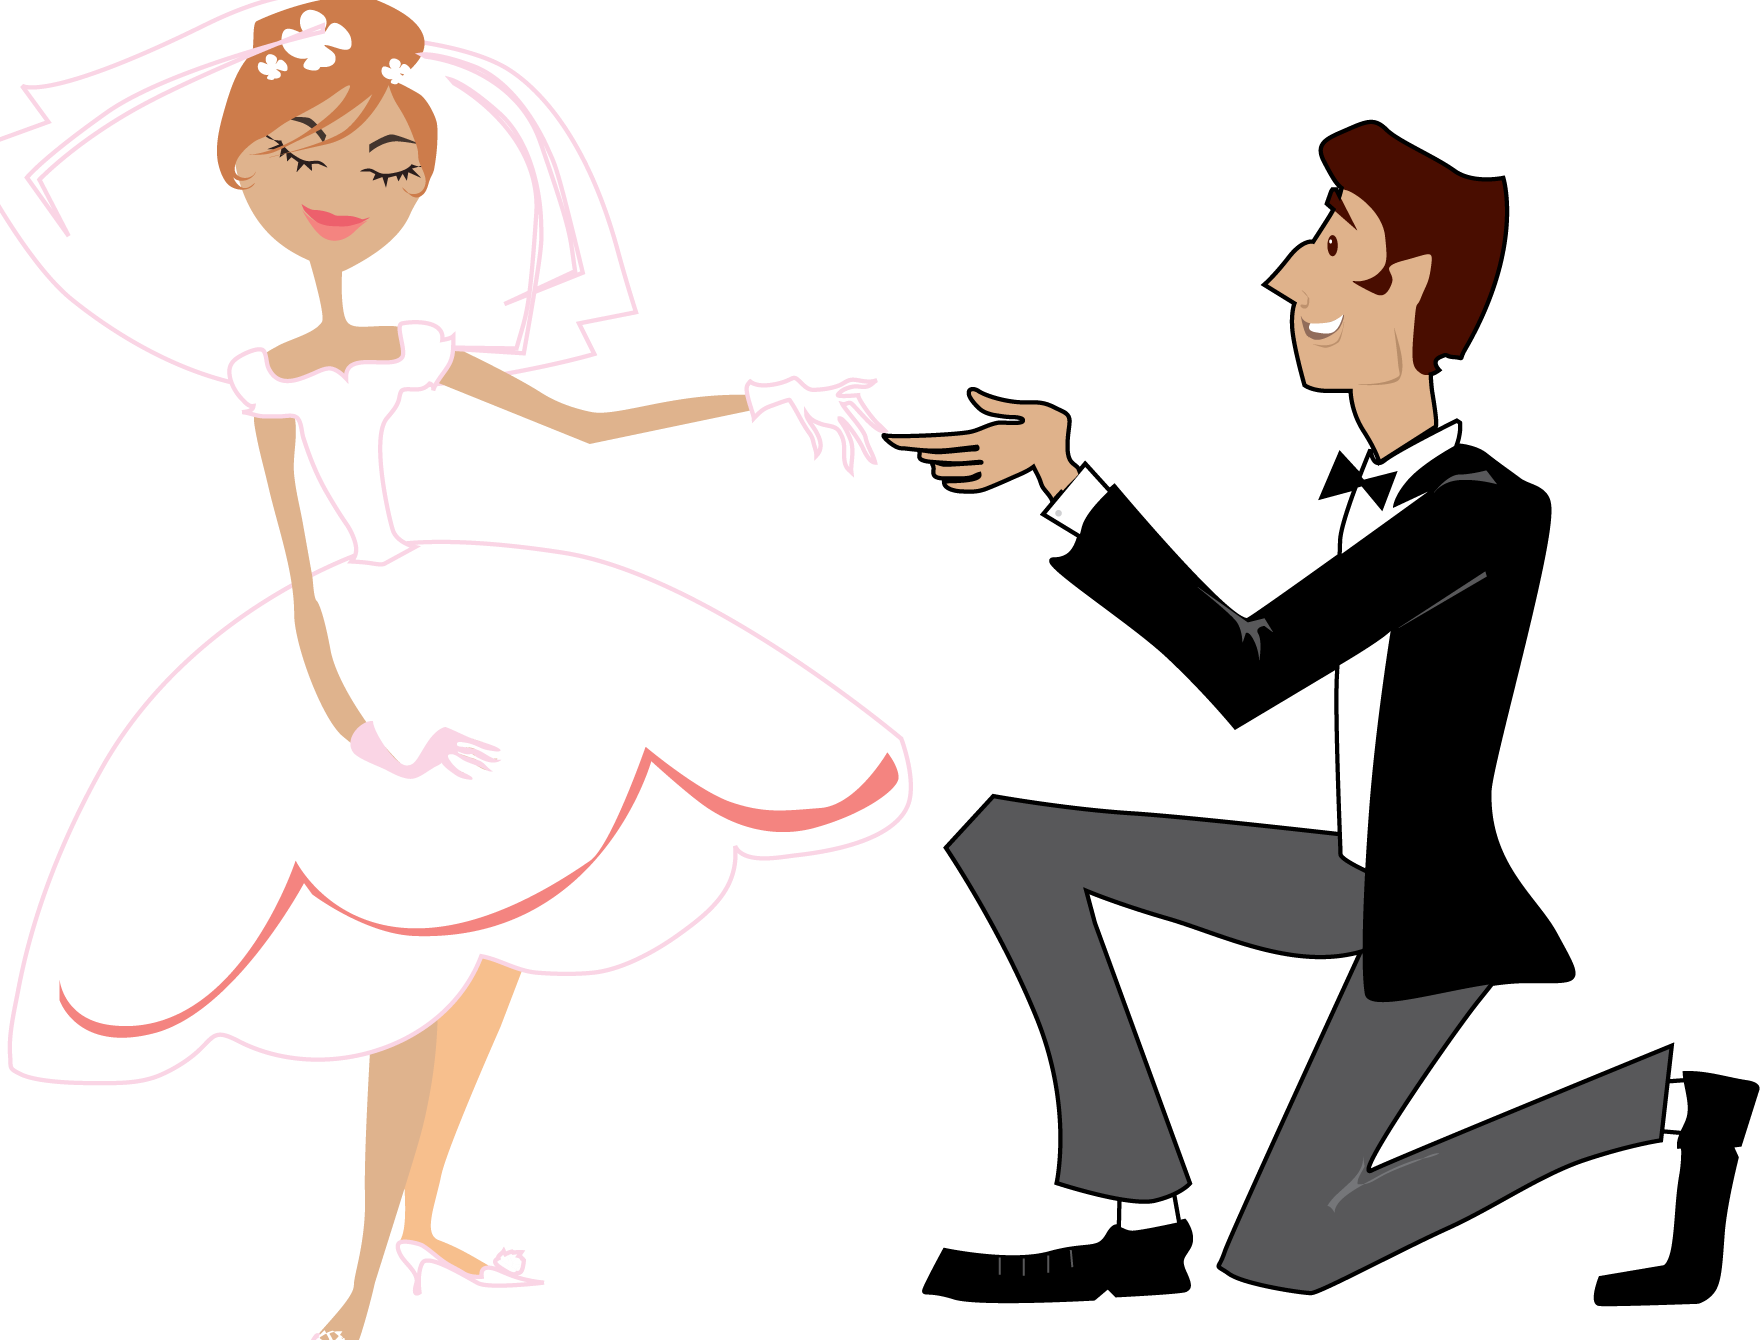 groom clipart engaged couple